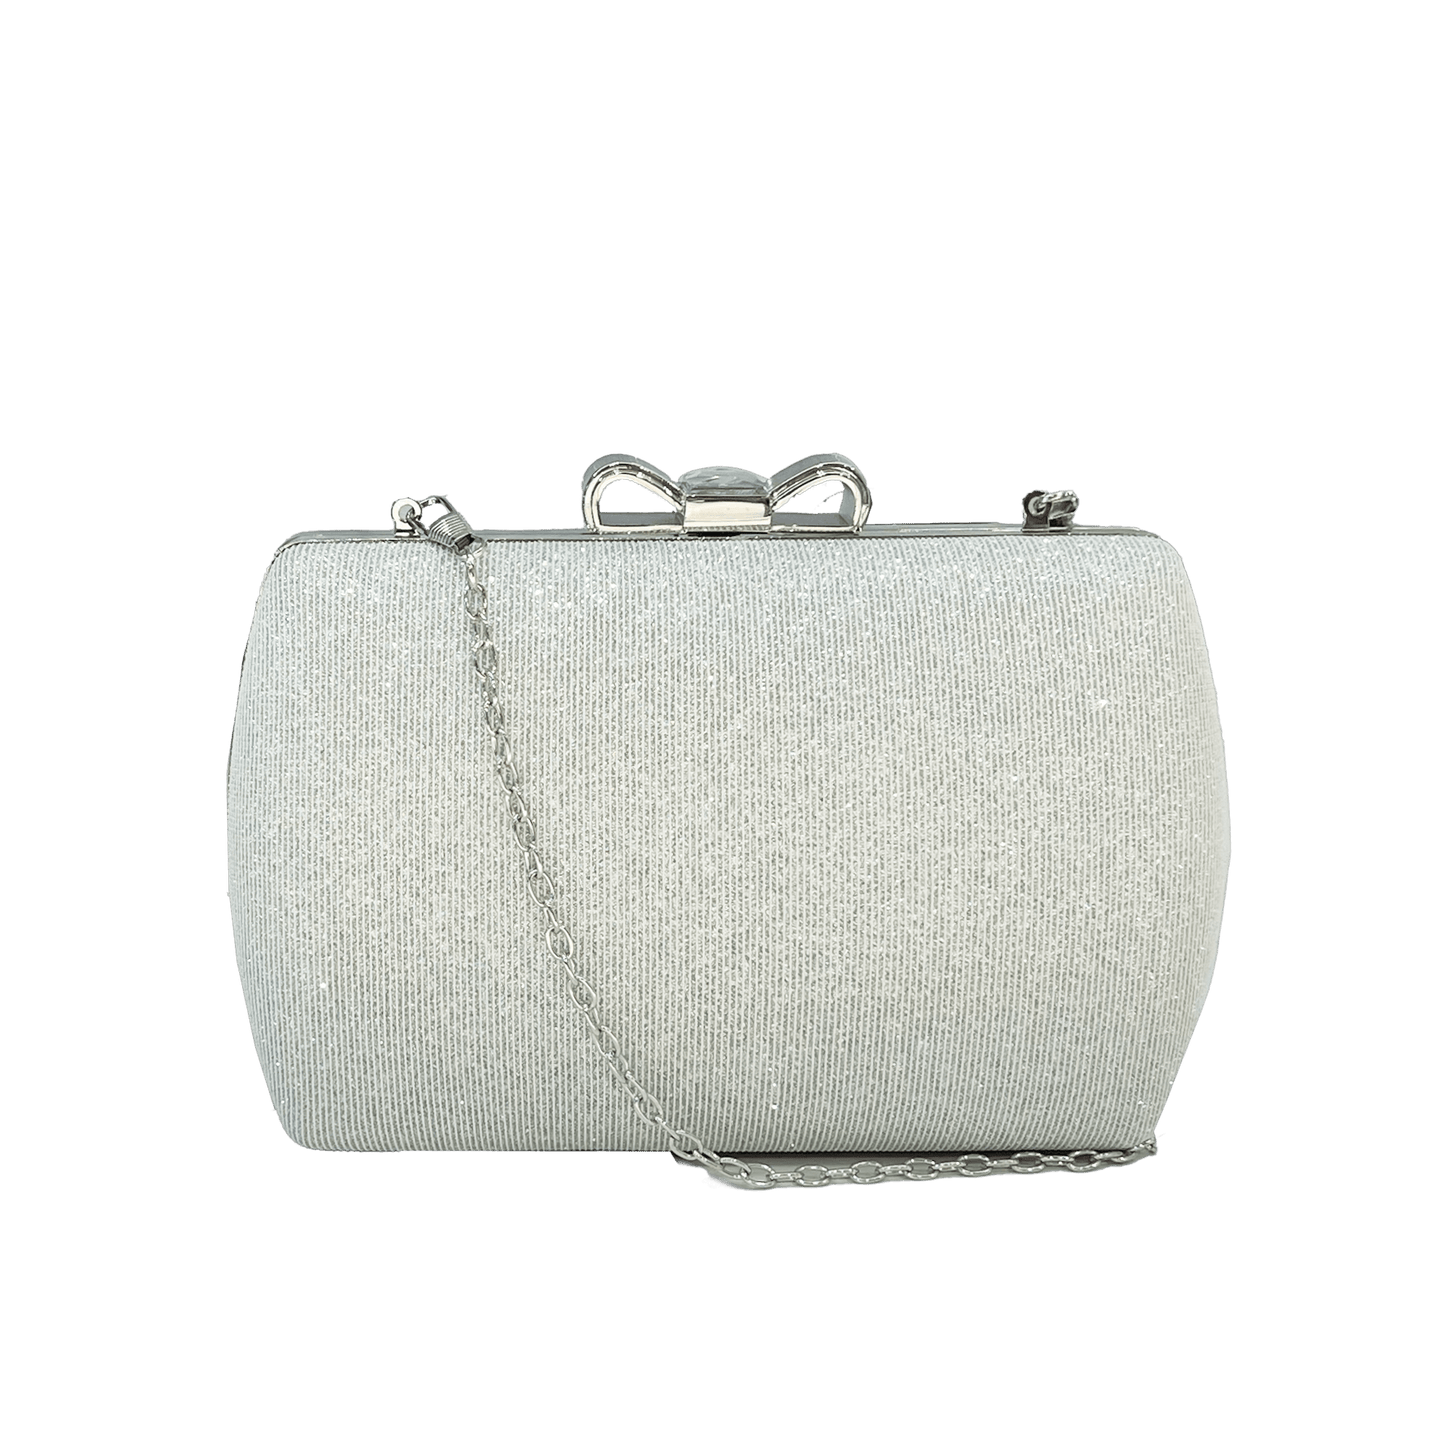 Carly Bow Clutch Bag - San Michelle Bags suitcase nz